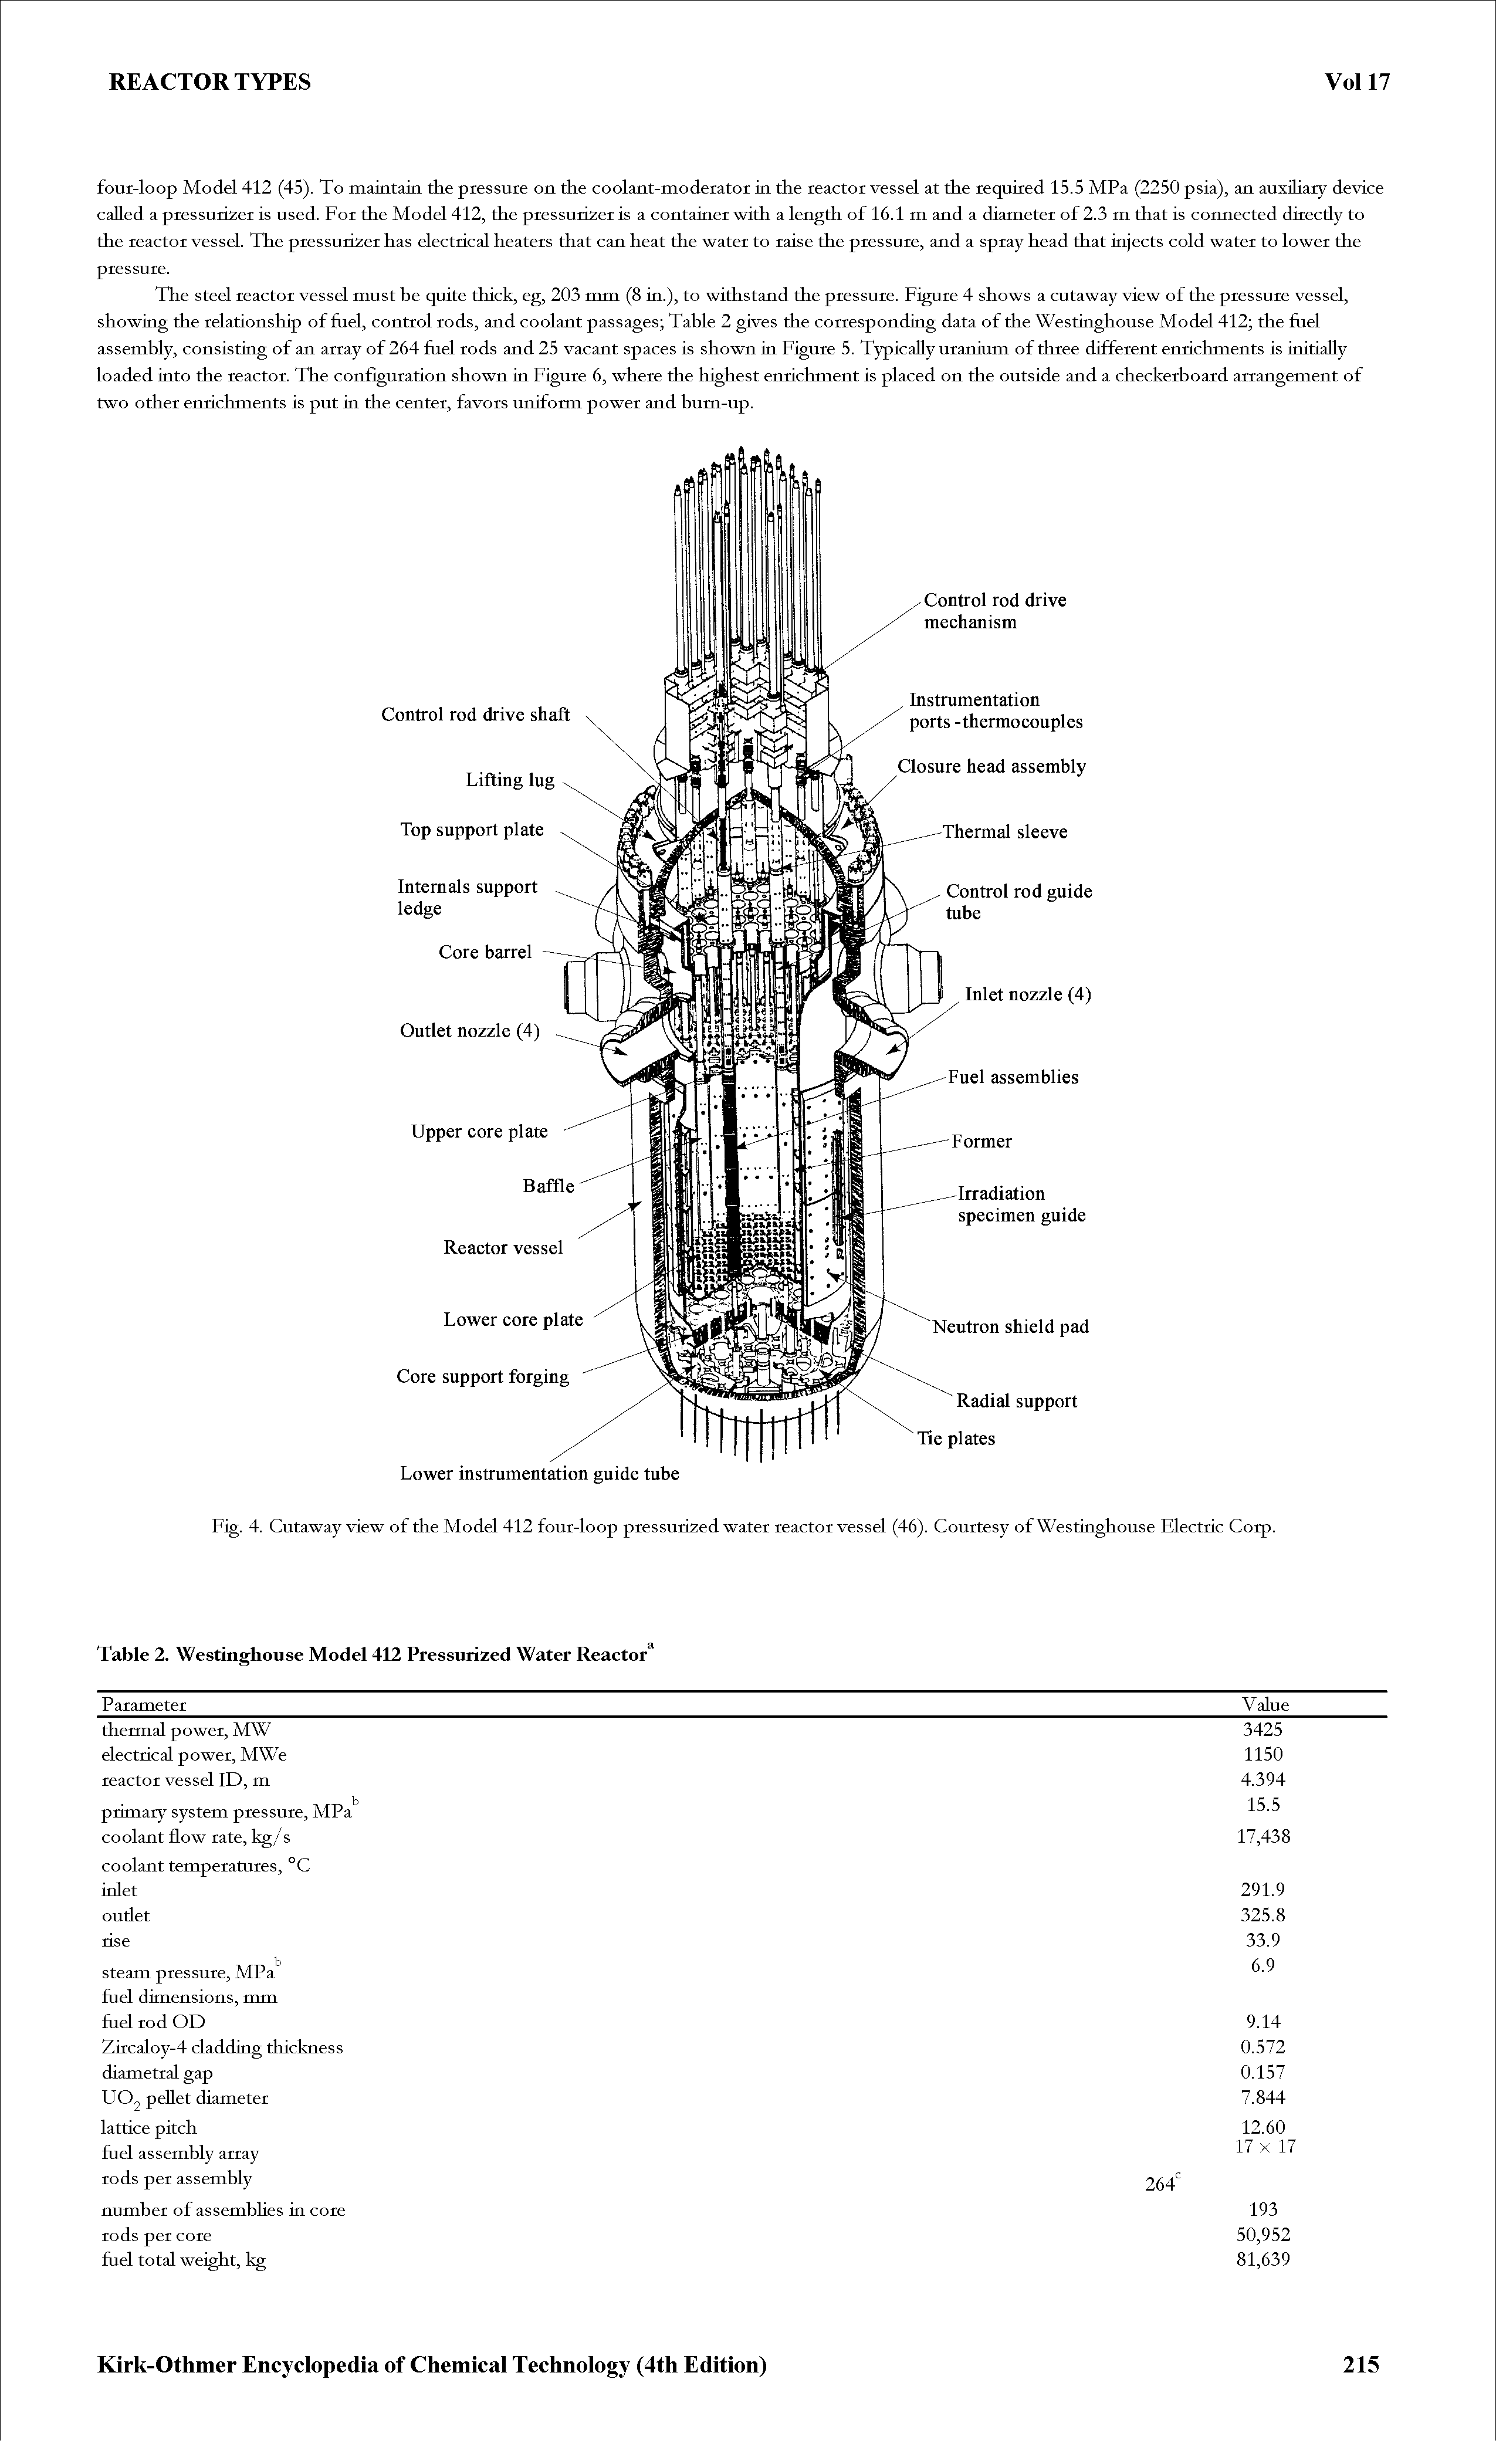 Fig. 4. Cutaway view of the Model 412 four-loop pressurized water reactor vessel (46). Courtesy of Westinghouse Electric Corp.